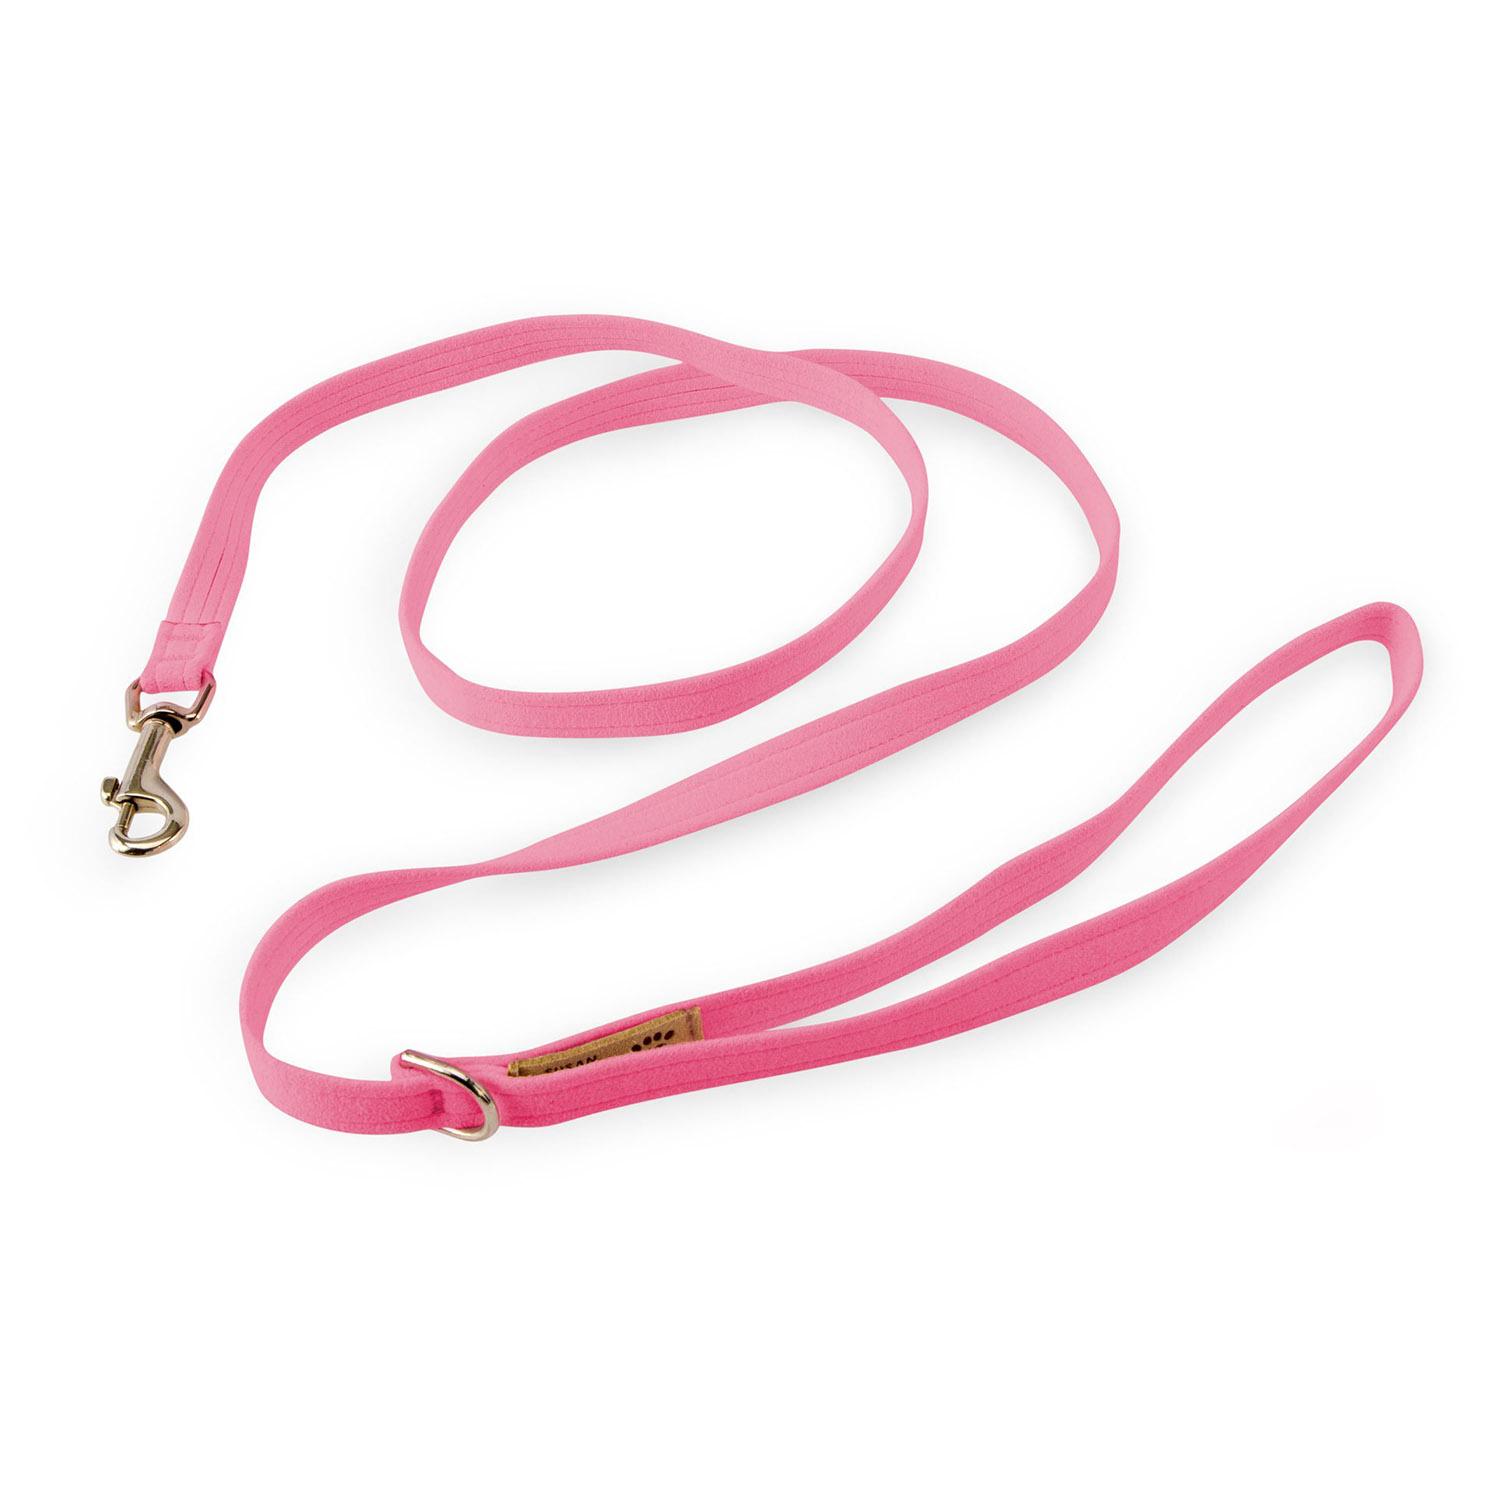 Solid Ultrasuede Dog Leash by Susan Lanci - Perfect Pink